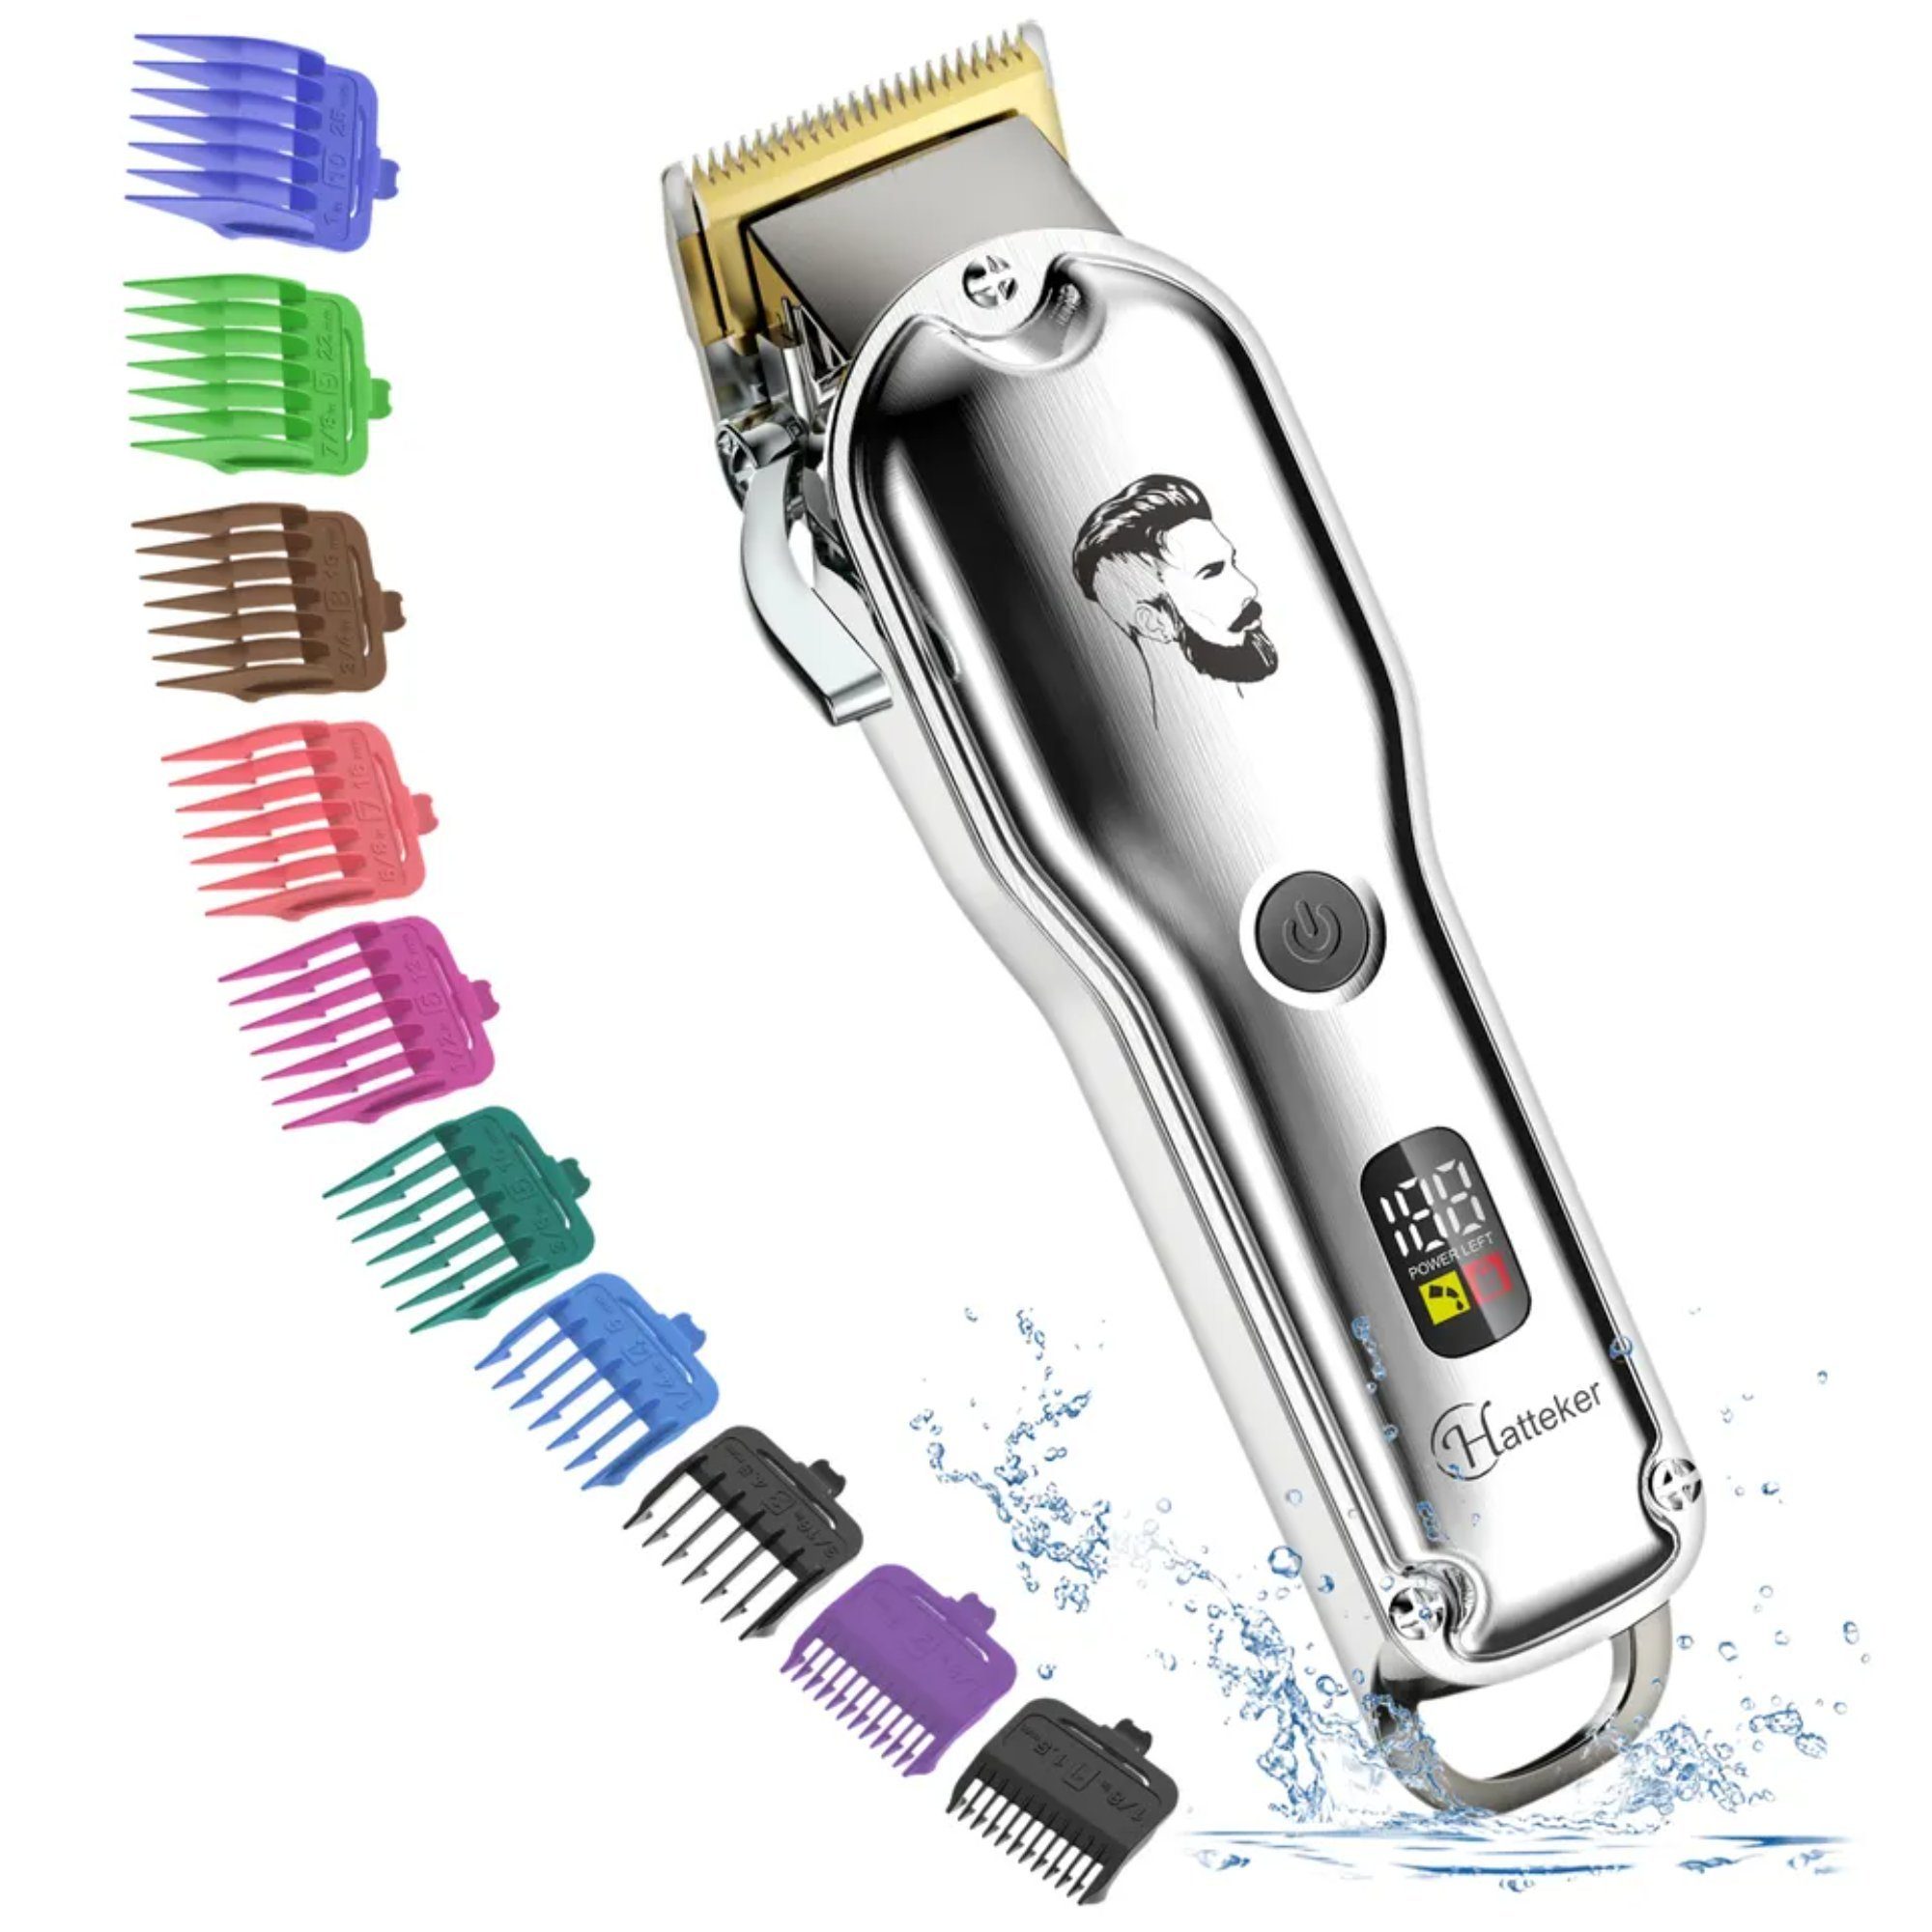 HATTEKER Beauty-Trimmer Hair Professional Grooming Colorful mAh, waschbar Combs Vollständig Kit Barbers Clippers, 2000 Rechargeable